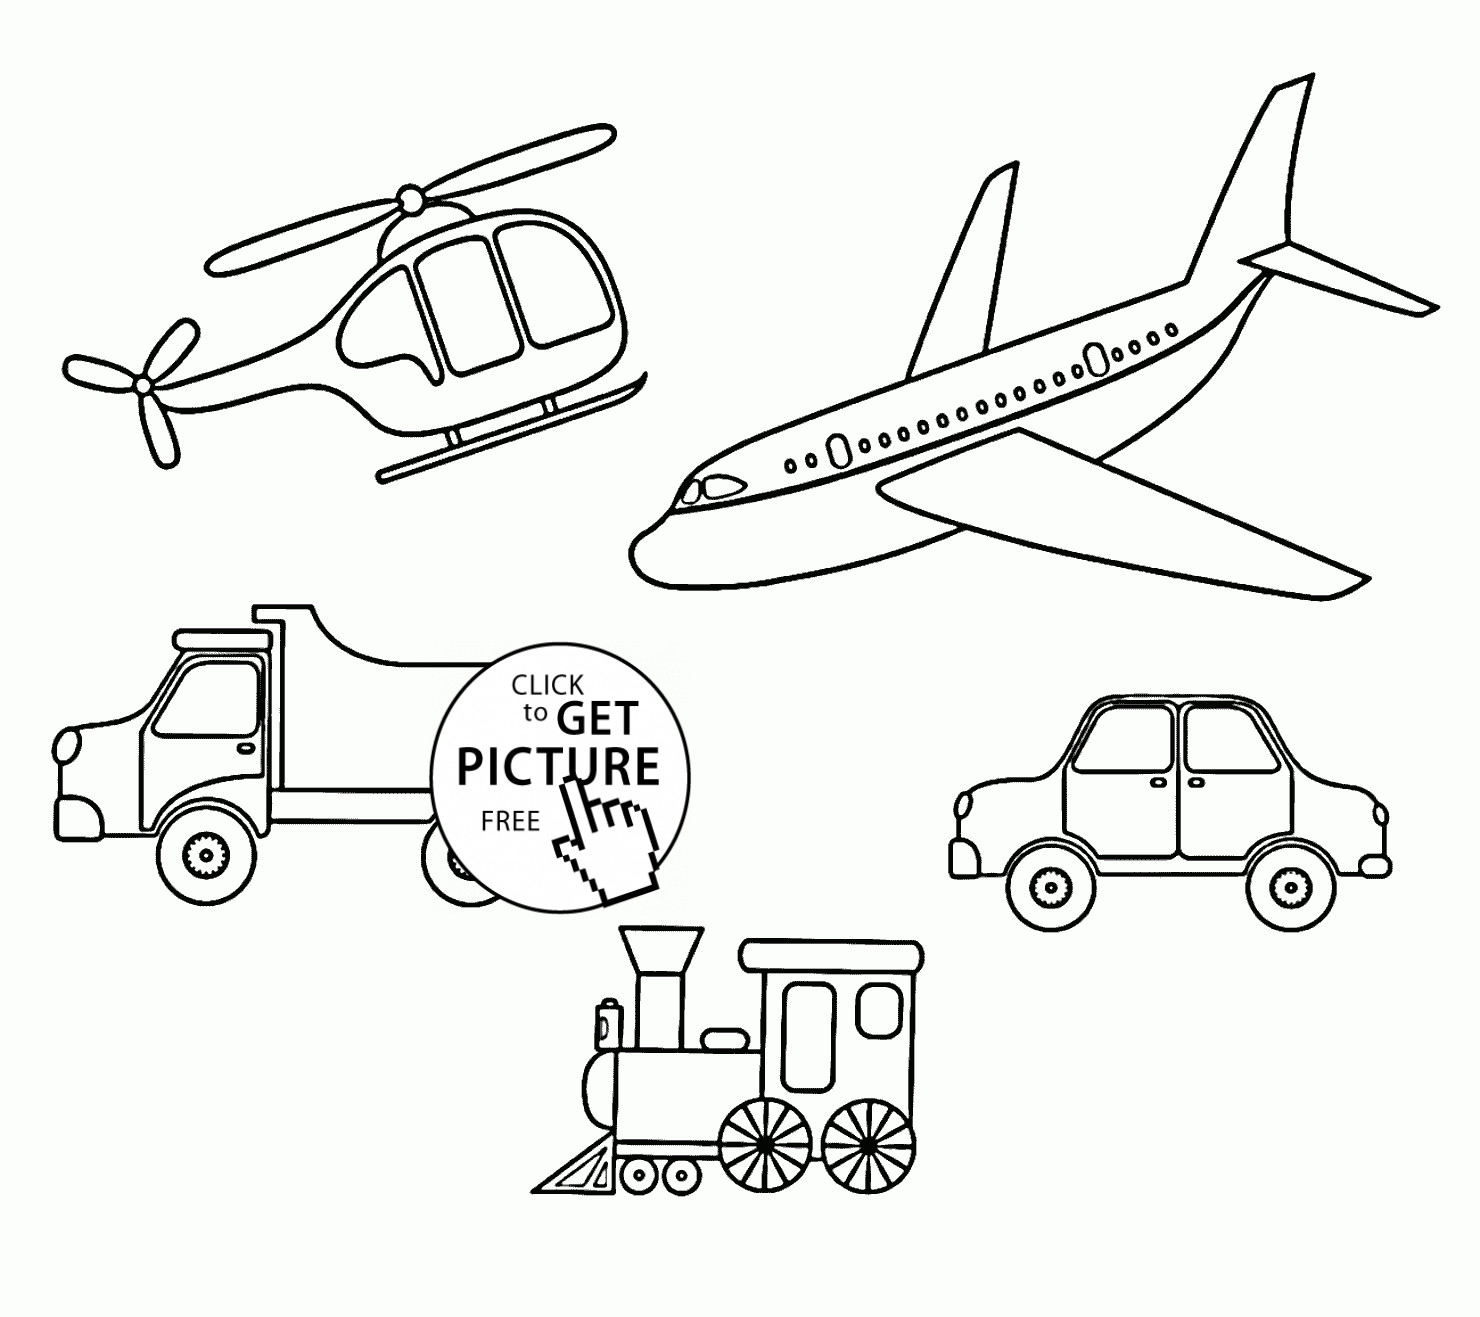 Transportation Coloring Pages For Toddlers
 Different Transportation coloring page for kids coloring